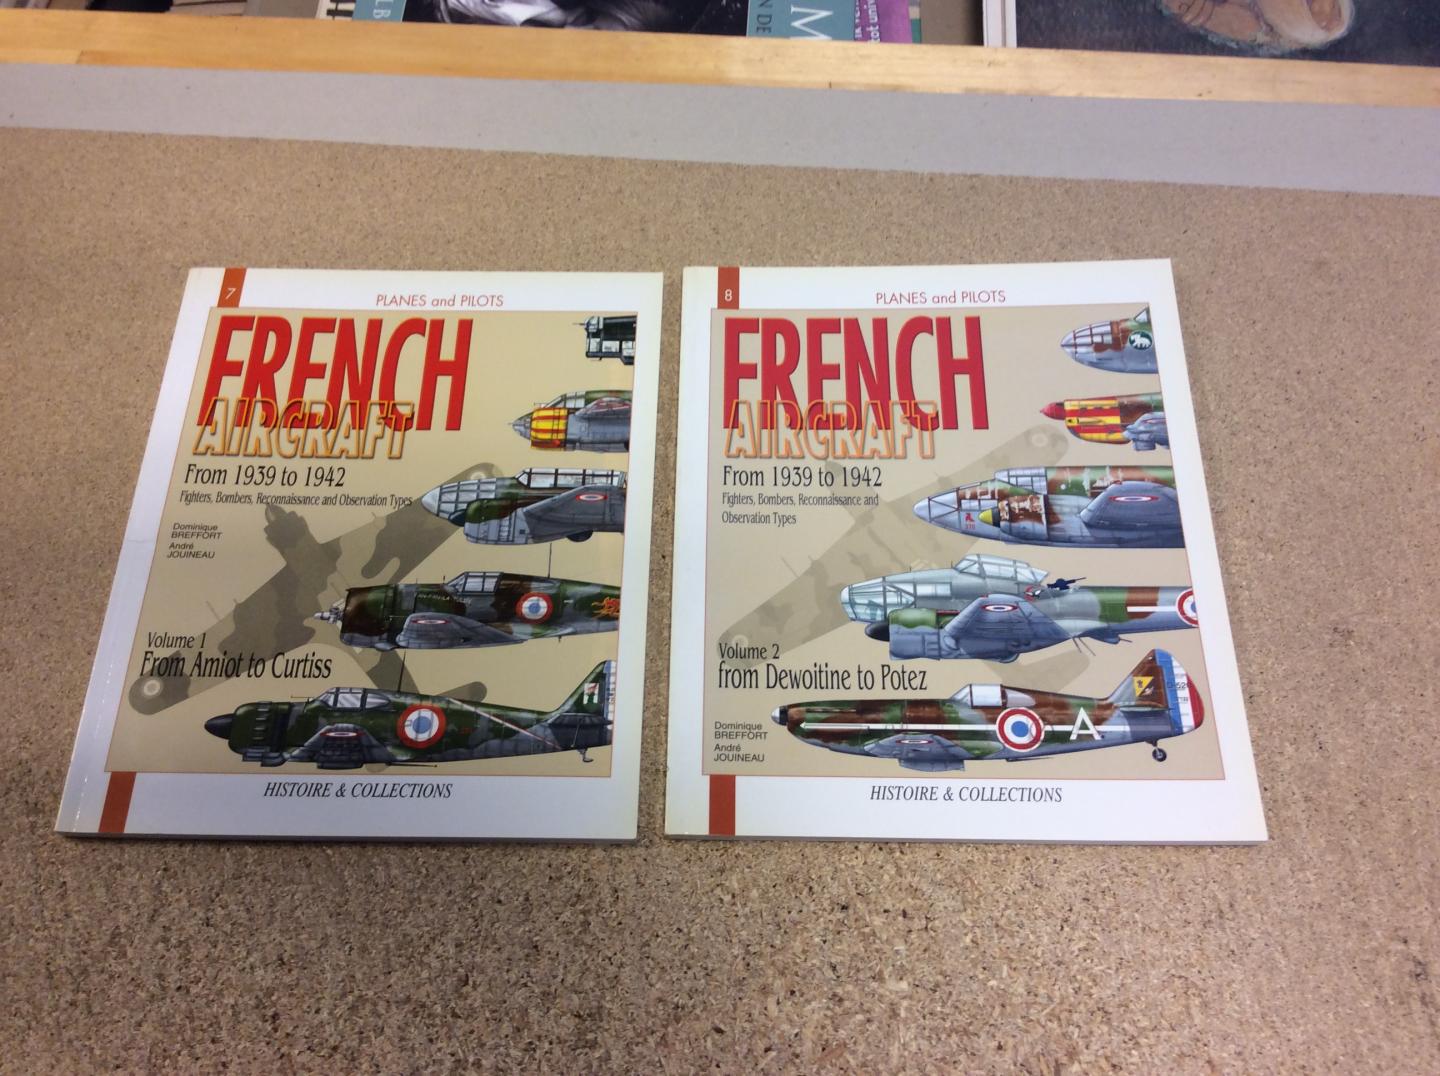 Breffort, Dominique | Jouineau, André - French Aircraft from 1939 - 1942,  Fighters, Bombers, Reconnaissance and Obervation Types, Volume 1: From Amiot to Curtiss + Volume 2 from Dewoitine to Potez